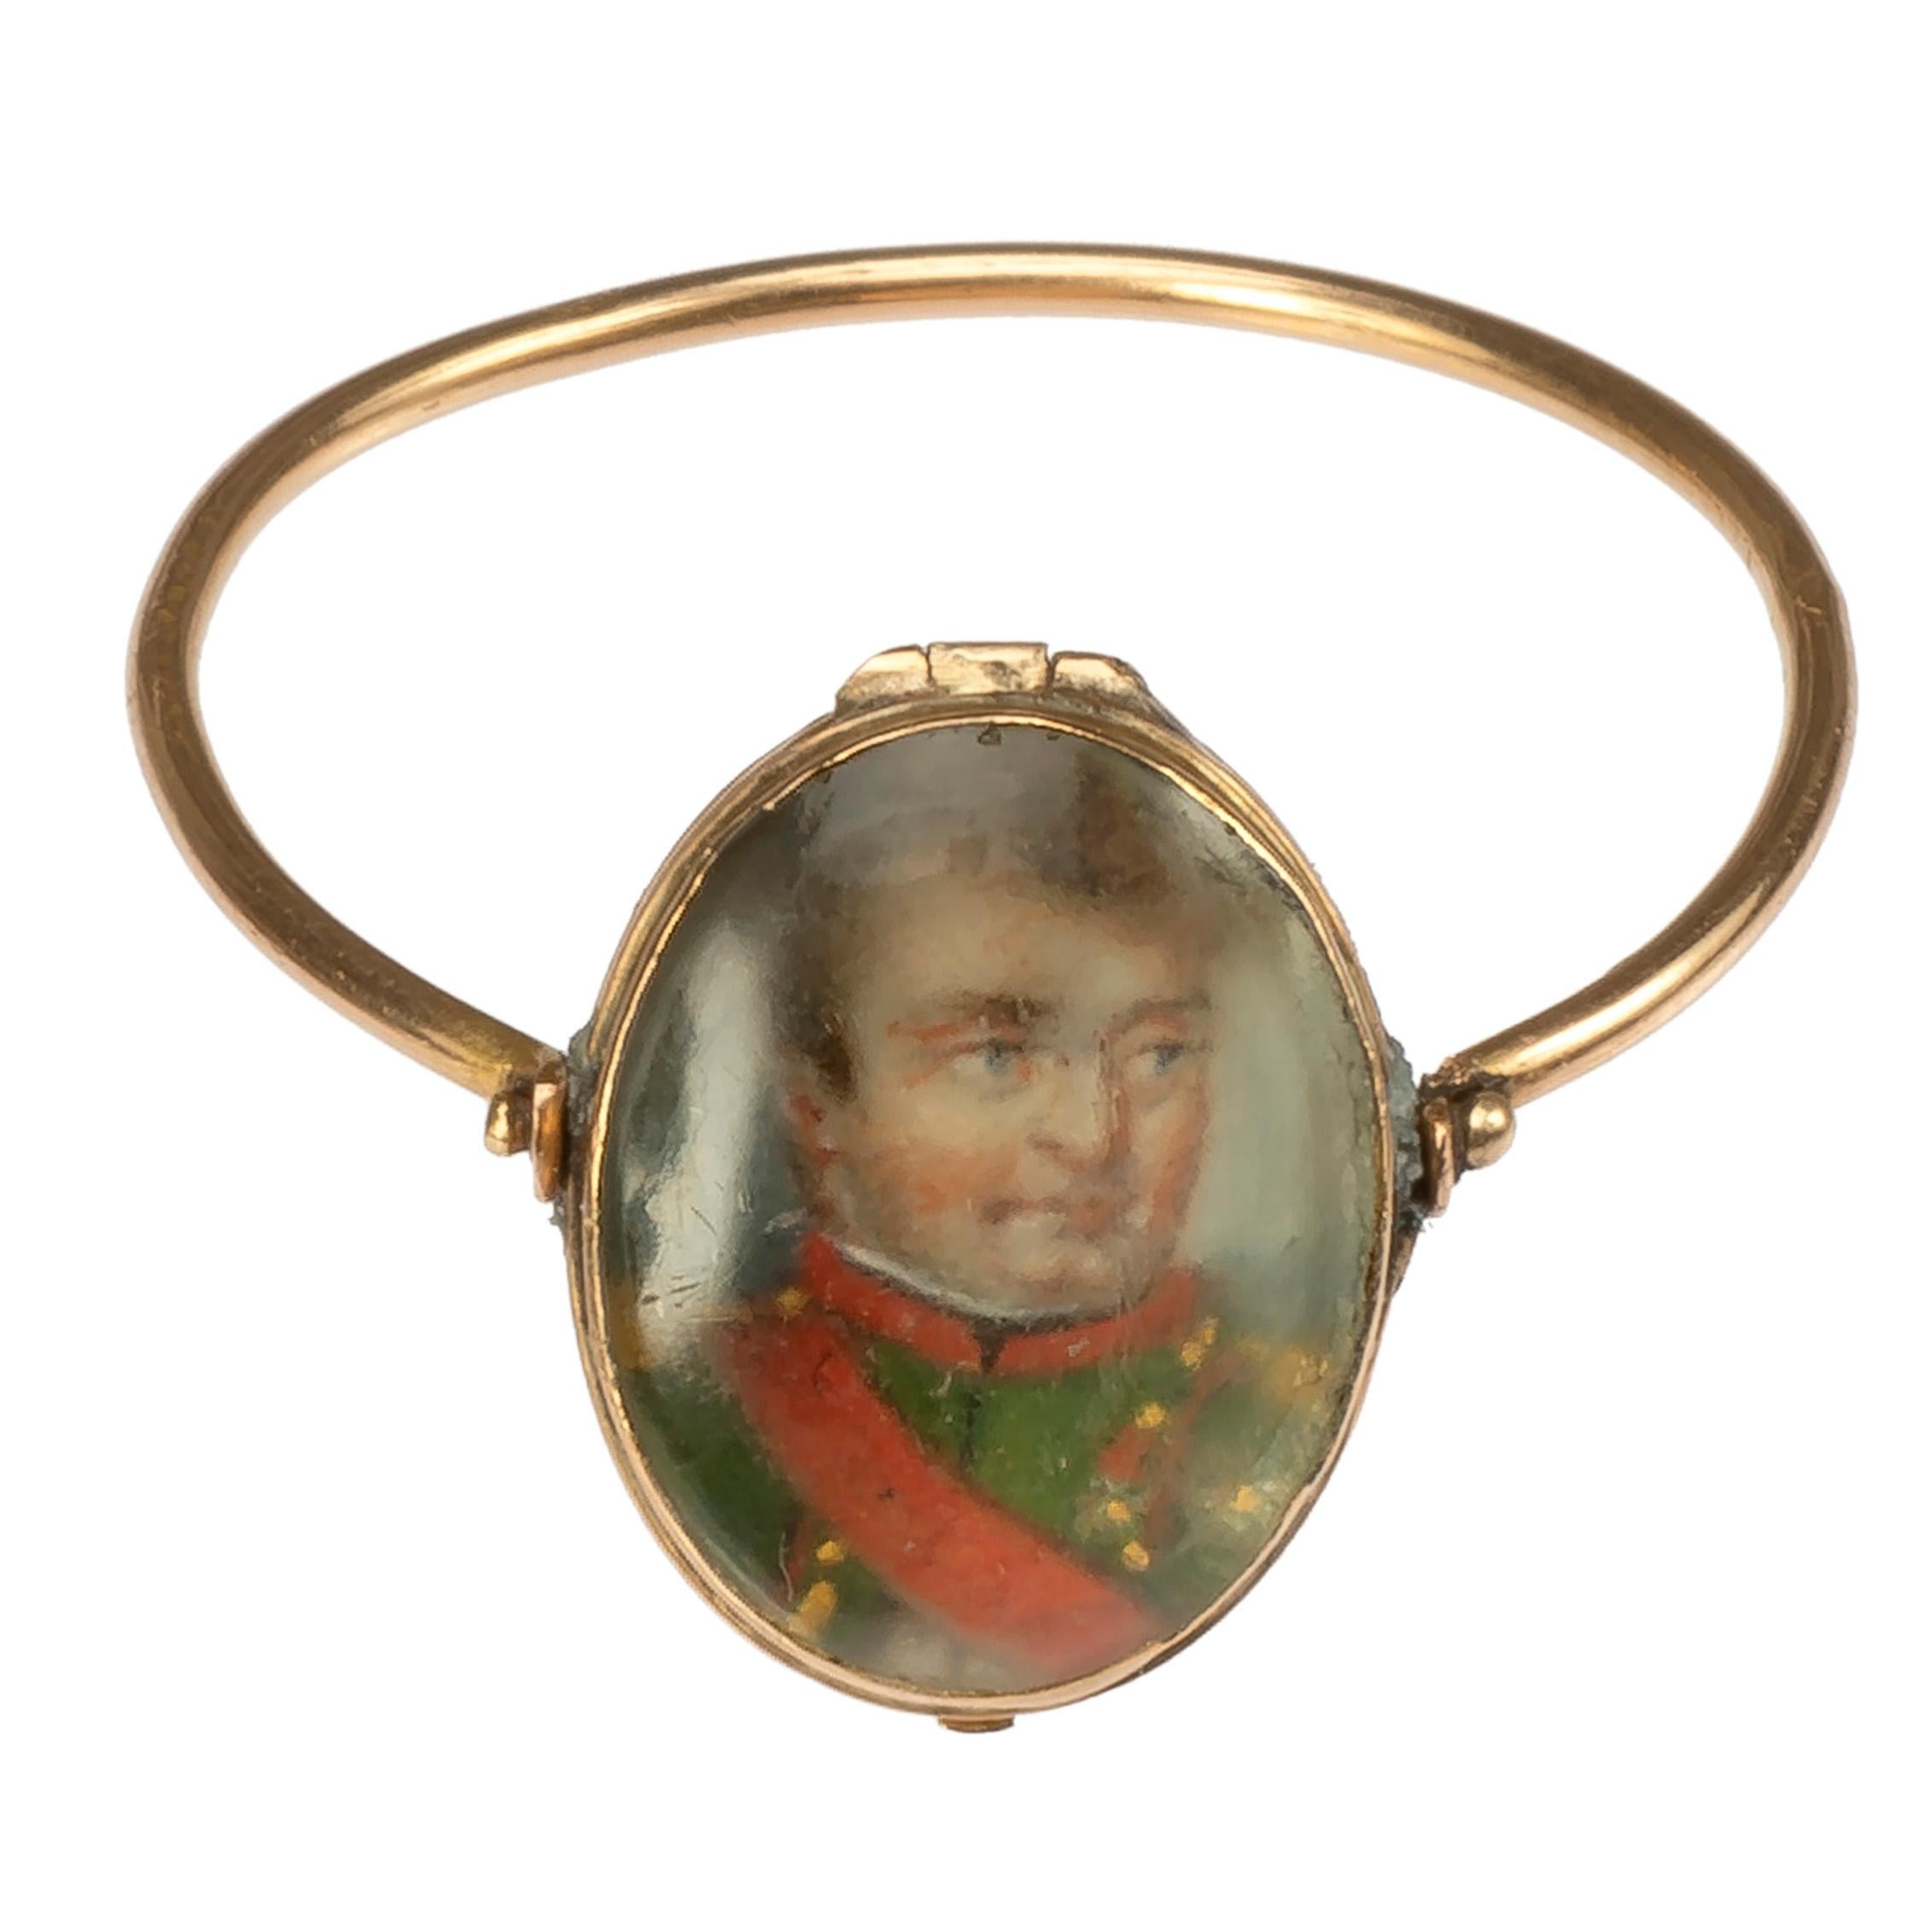 Swivel Ring with Portrait of Napoleon in a Crystal Locket 
France, c. 1815
Weight 1.7 gr.; bezel 12.6 x 10 mm.; circumference 58.21 mm.; US size 8 1/2; UK size Q 3/4	

The bezel of this rare historic ring bears a portrait painted on bone of